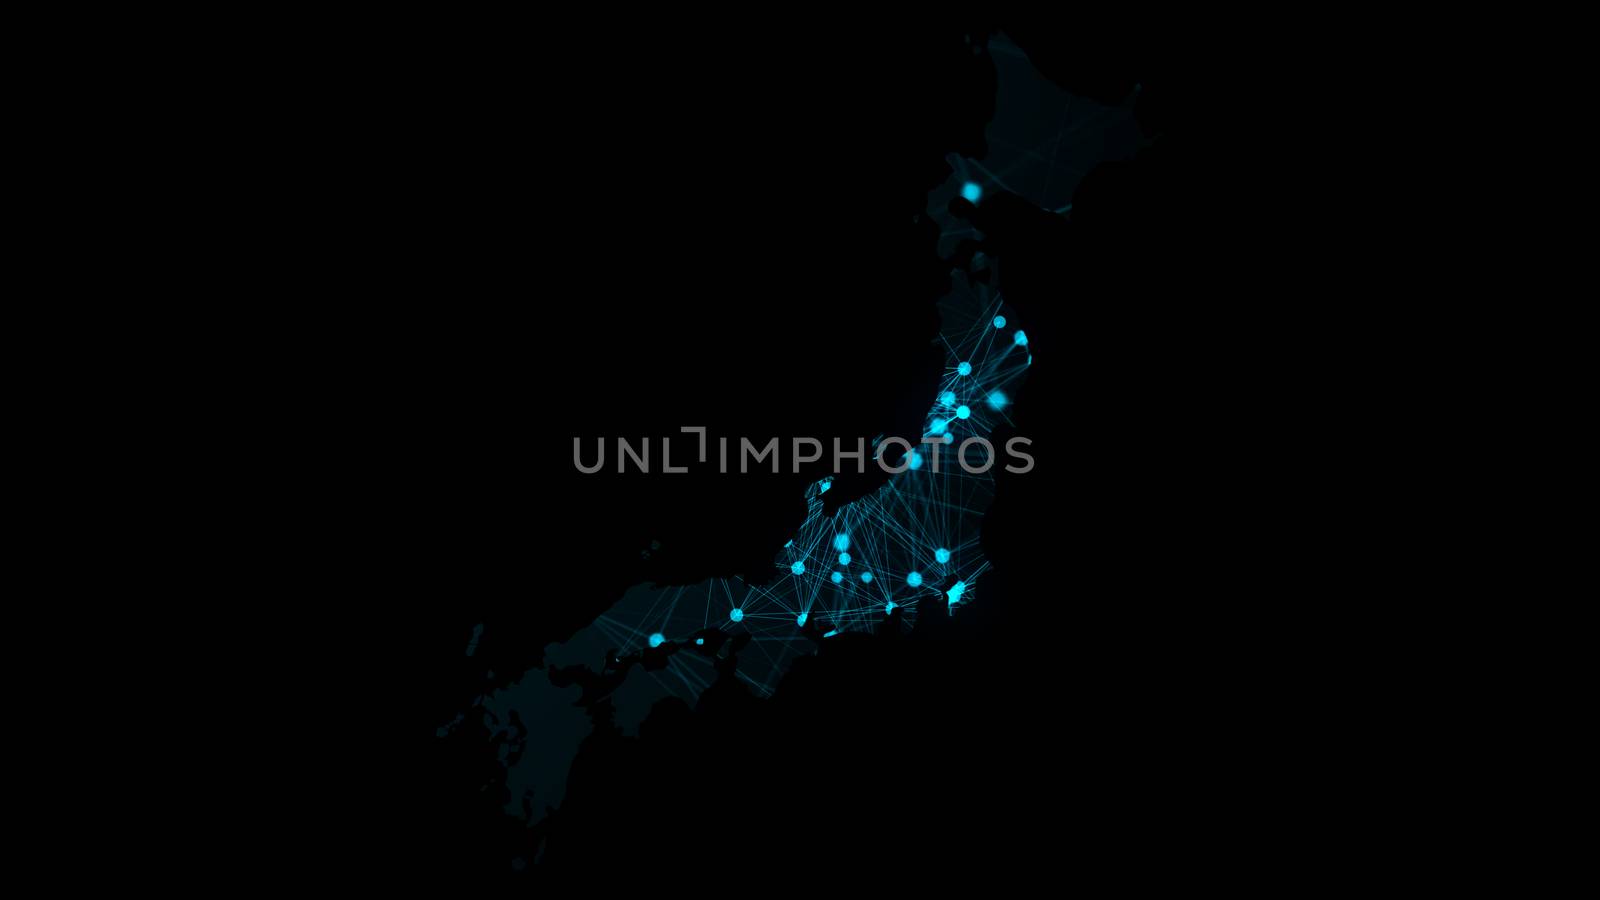 Japan map with many network connections, 3d rendering computer generated background